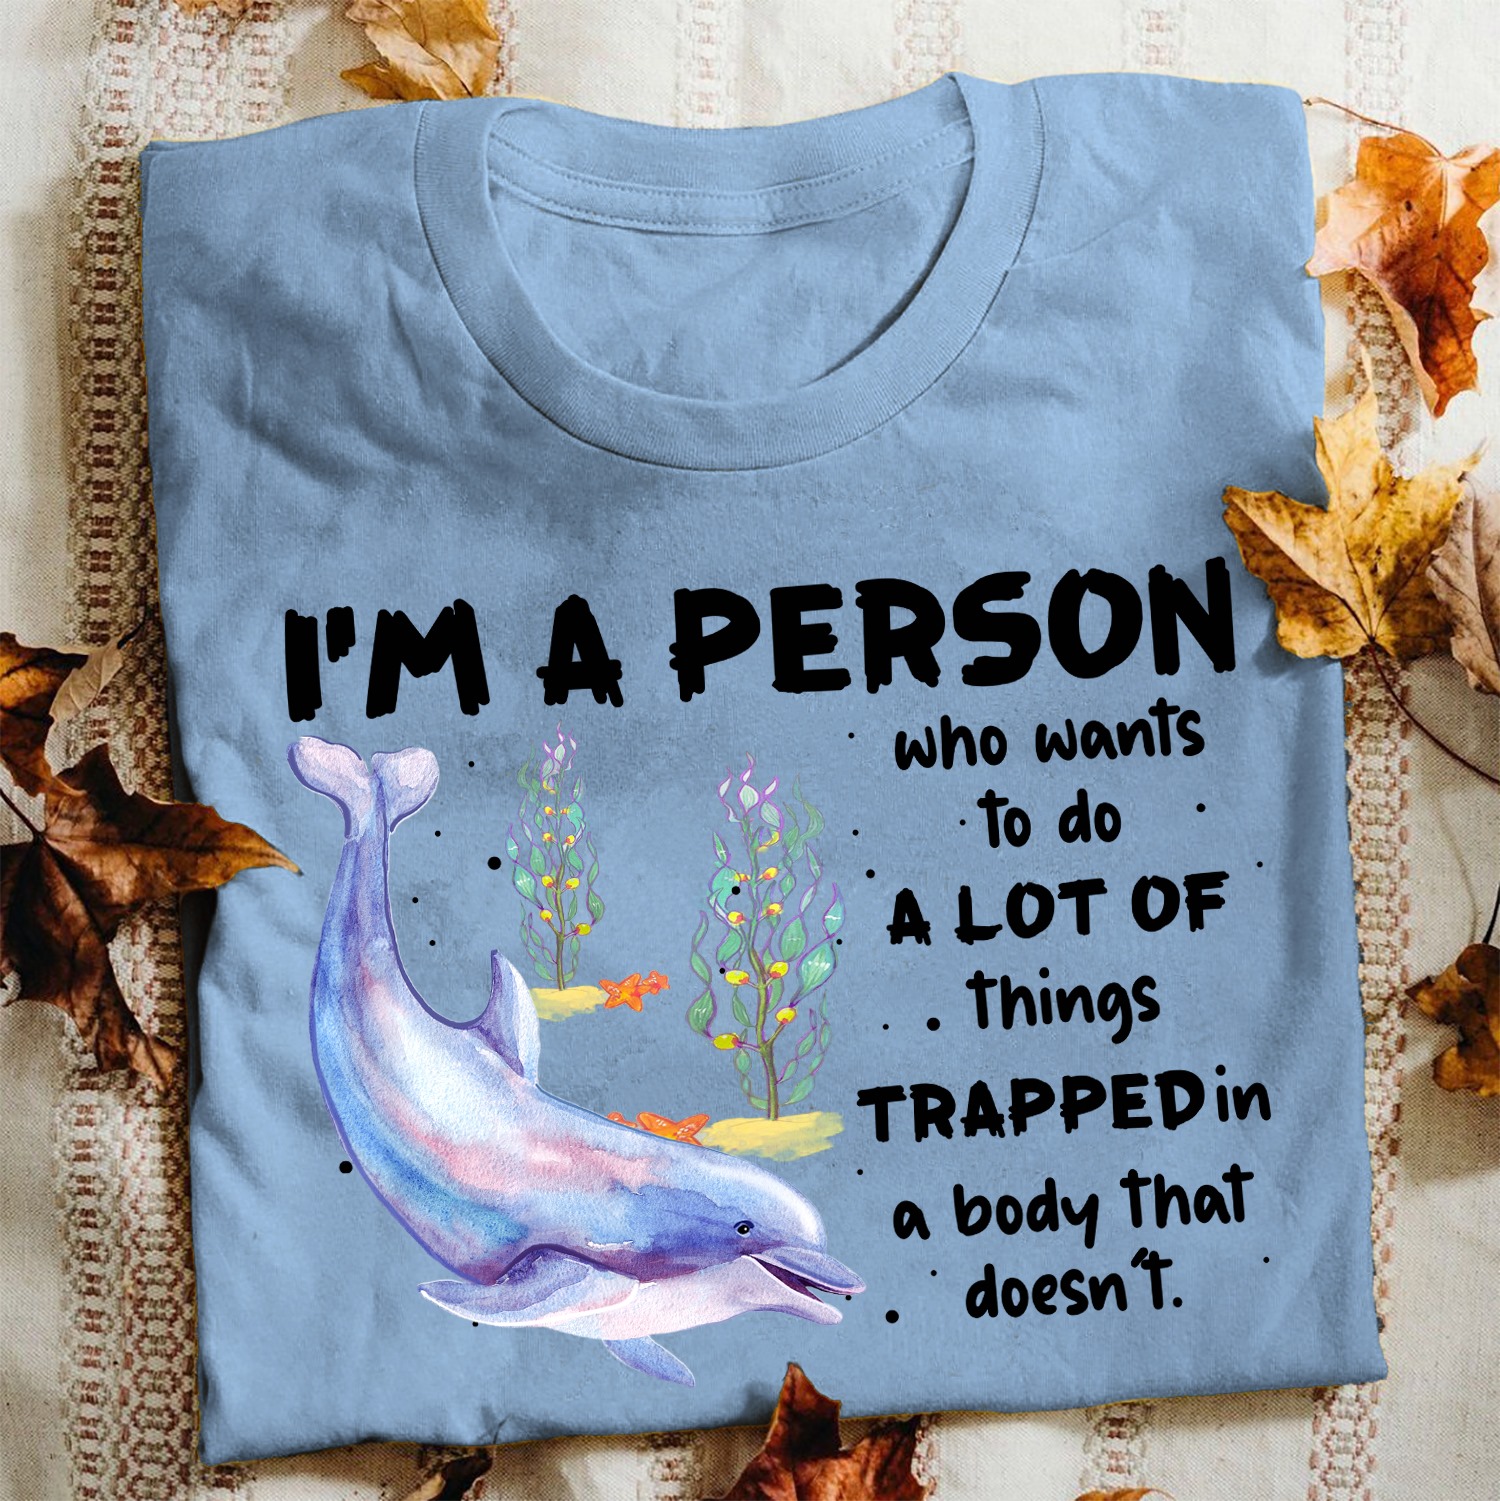 I'm a person who wants to do a lot of things trapped in a body that doesn't - Dolphin lover